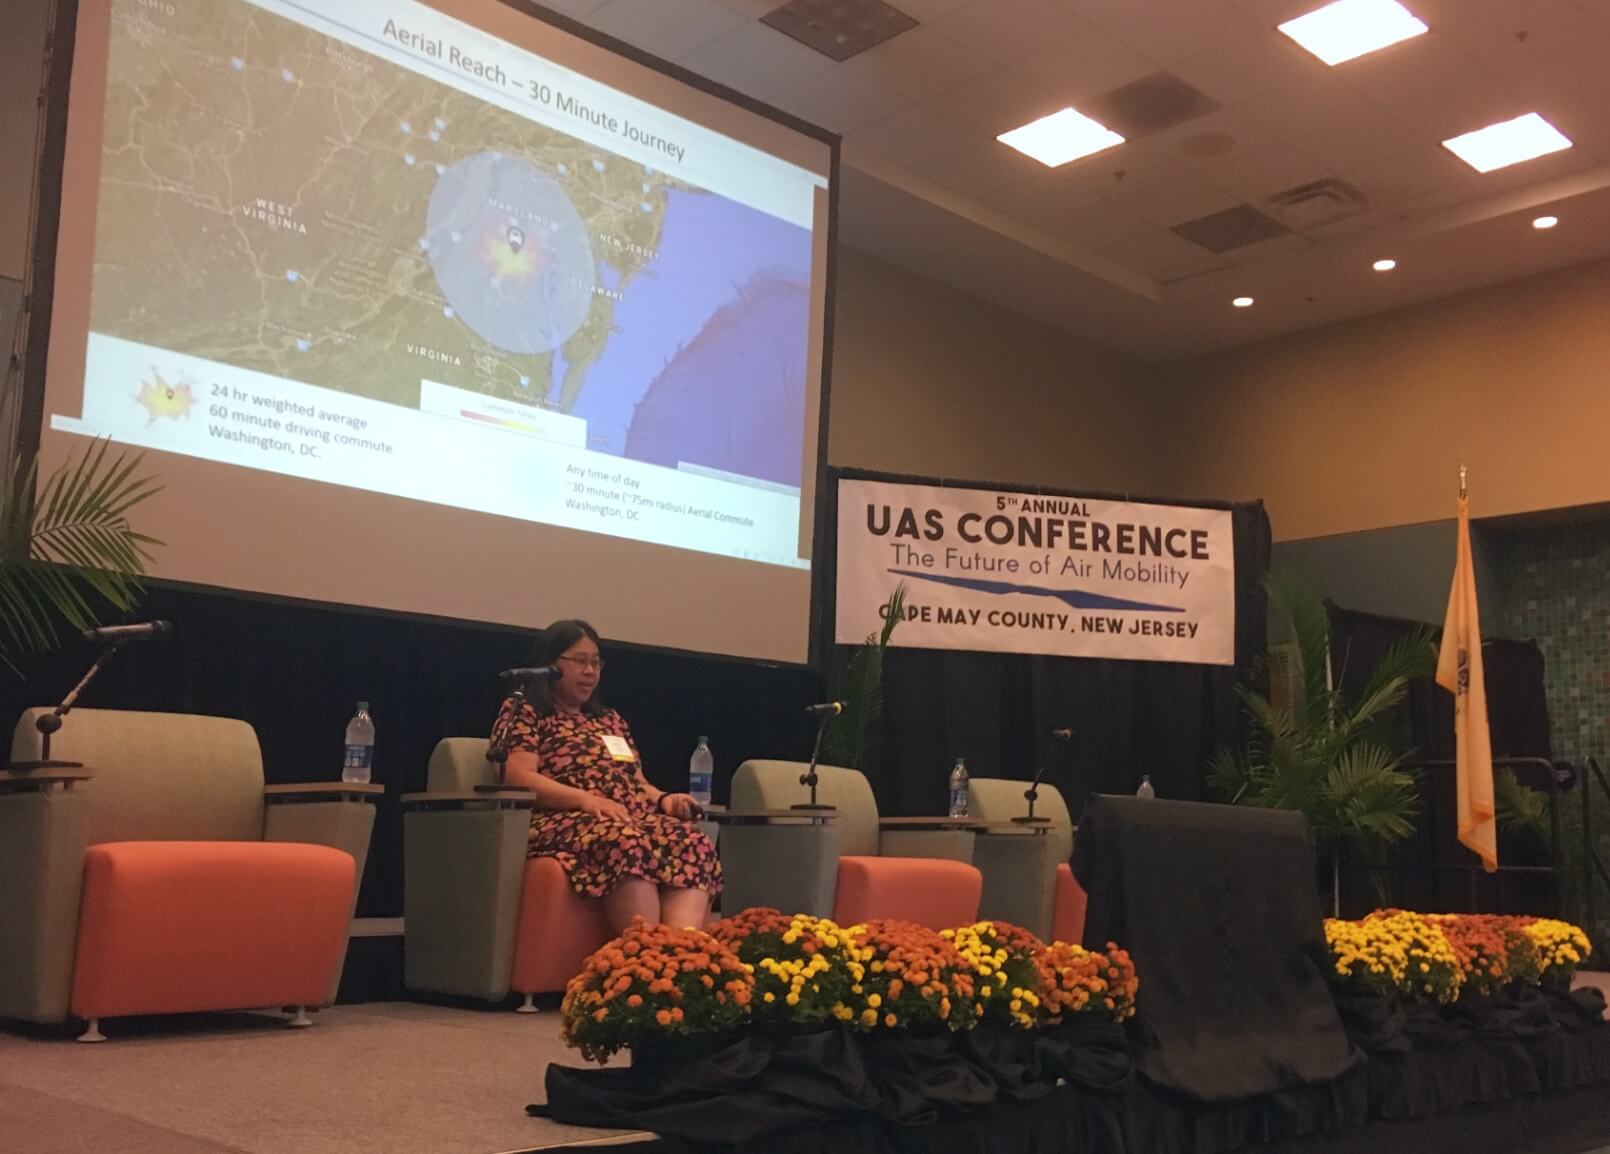 NASA Deputy Branch Chief Karen Tung Cate begins her panel at the Wildwoods Convention Center for the Fifth Annual Unmanned Aircraft Systems (UAS) Conference Sept. 23